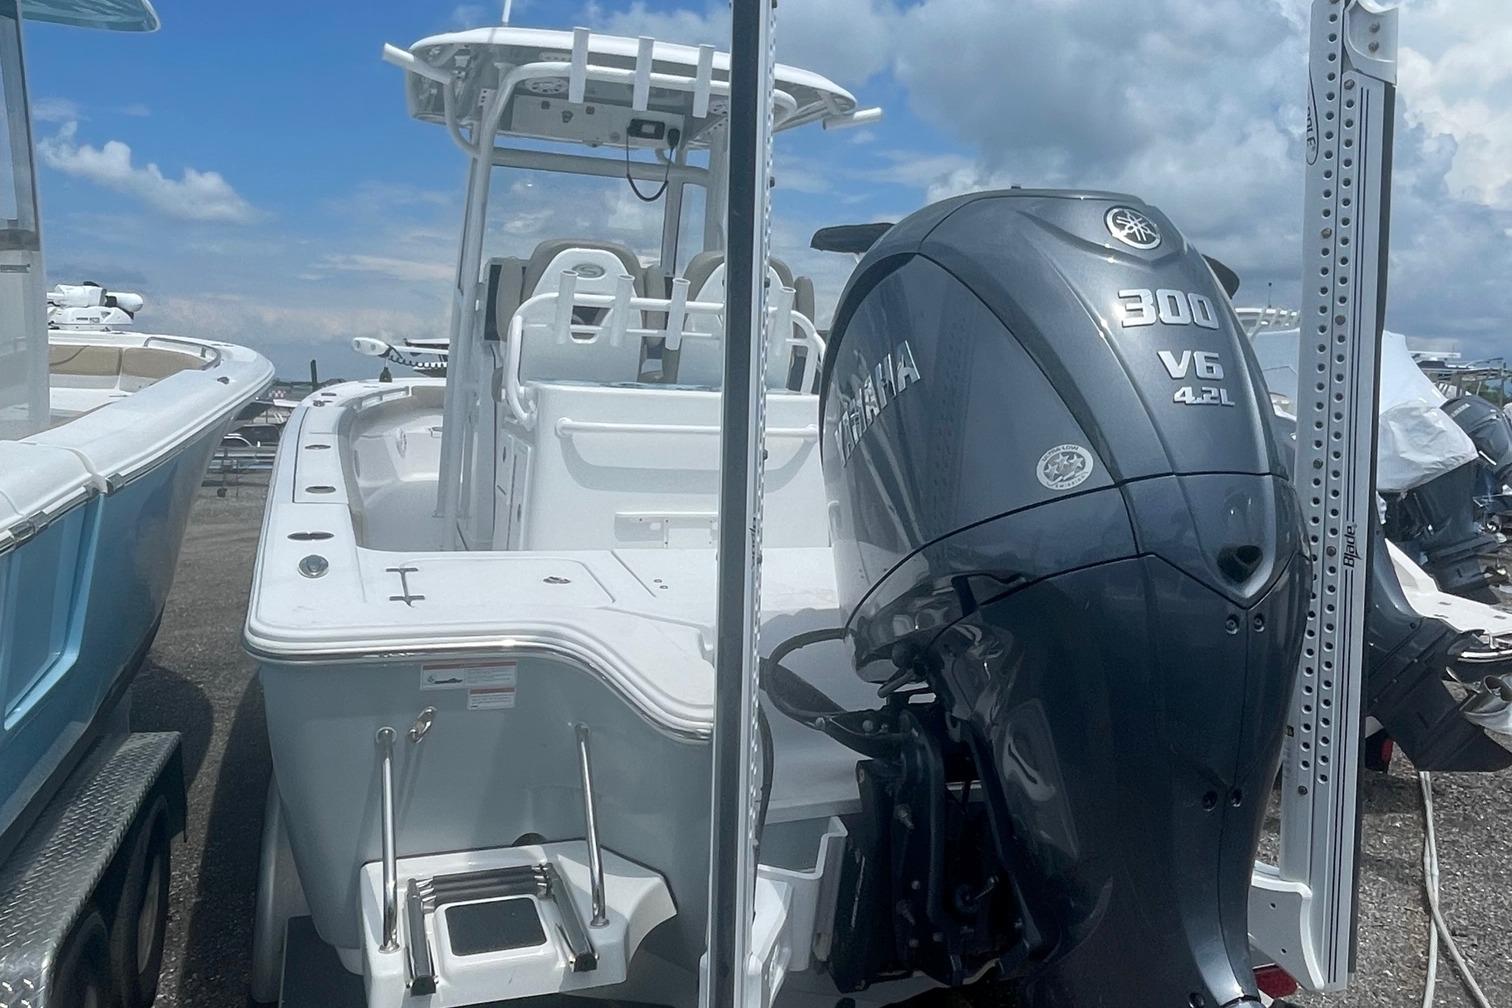 Bluewave Cyclone vs Leaning post - The Hull Truth - Boating and